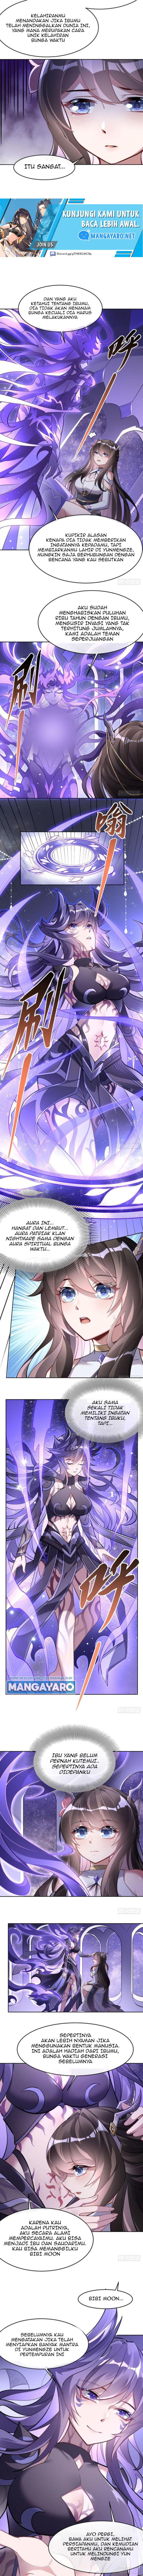 Dilarang COPAS - situs resmi www.mangacanblog.com - Komik my female apprentices are all big shots from the future 106 - chapter 106 107 Indonesia my female apprentices are all big shots from the future 106 - chapter 106 Terbaru 2|Baca Manga Komik Indonesia|Mangacan